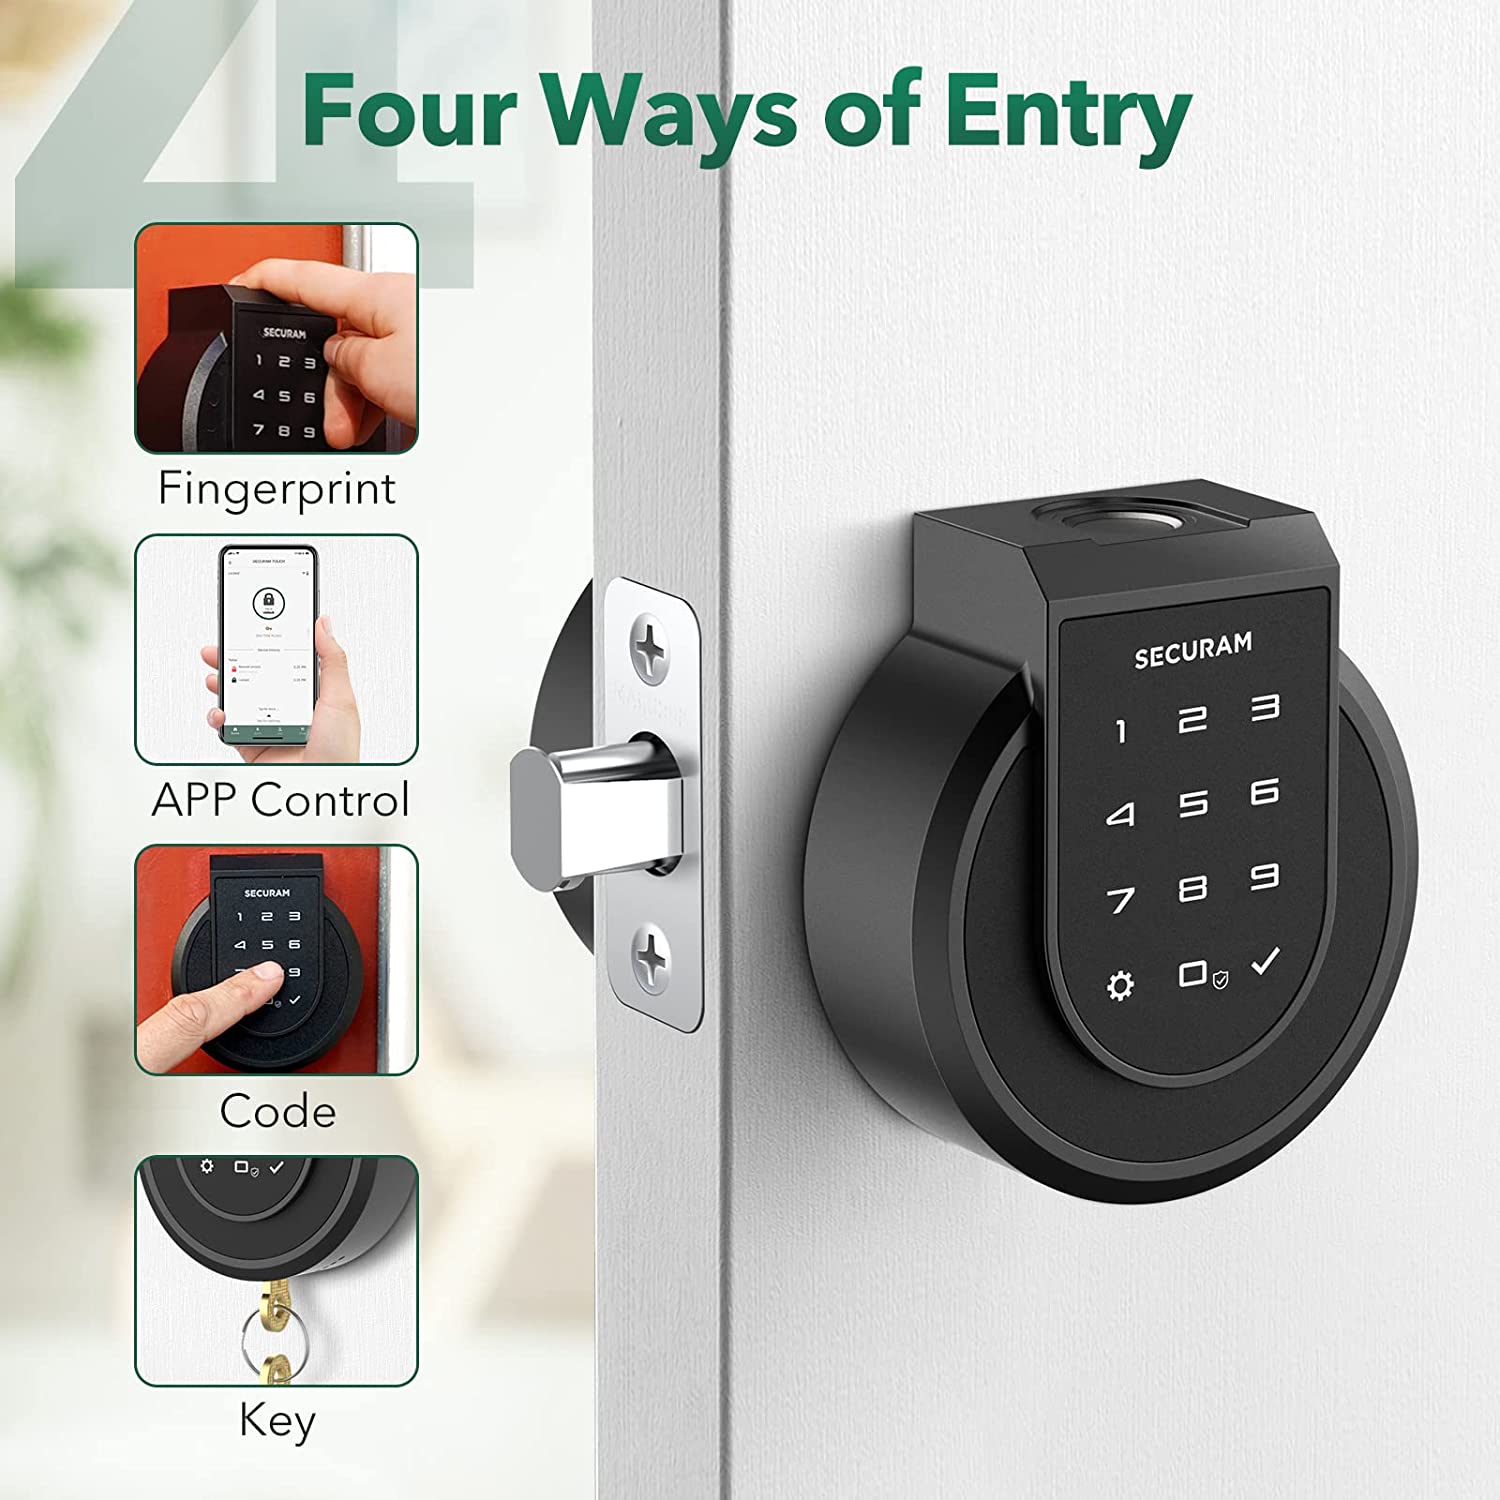 A SECURAM Touch - Fingerprint Smart Lock with four ways of entry.